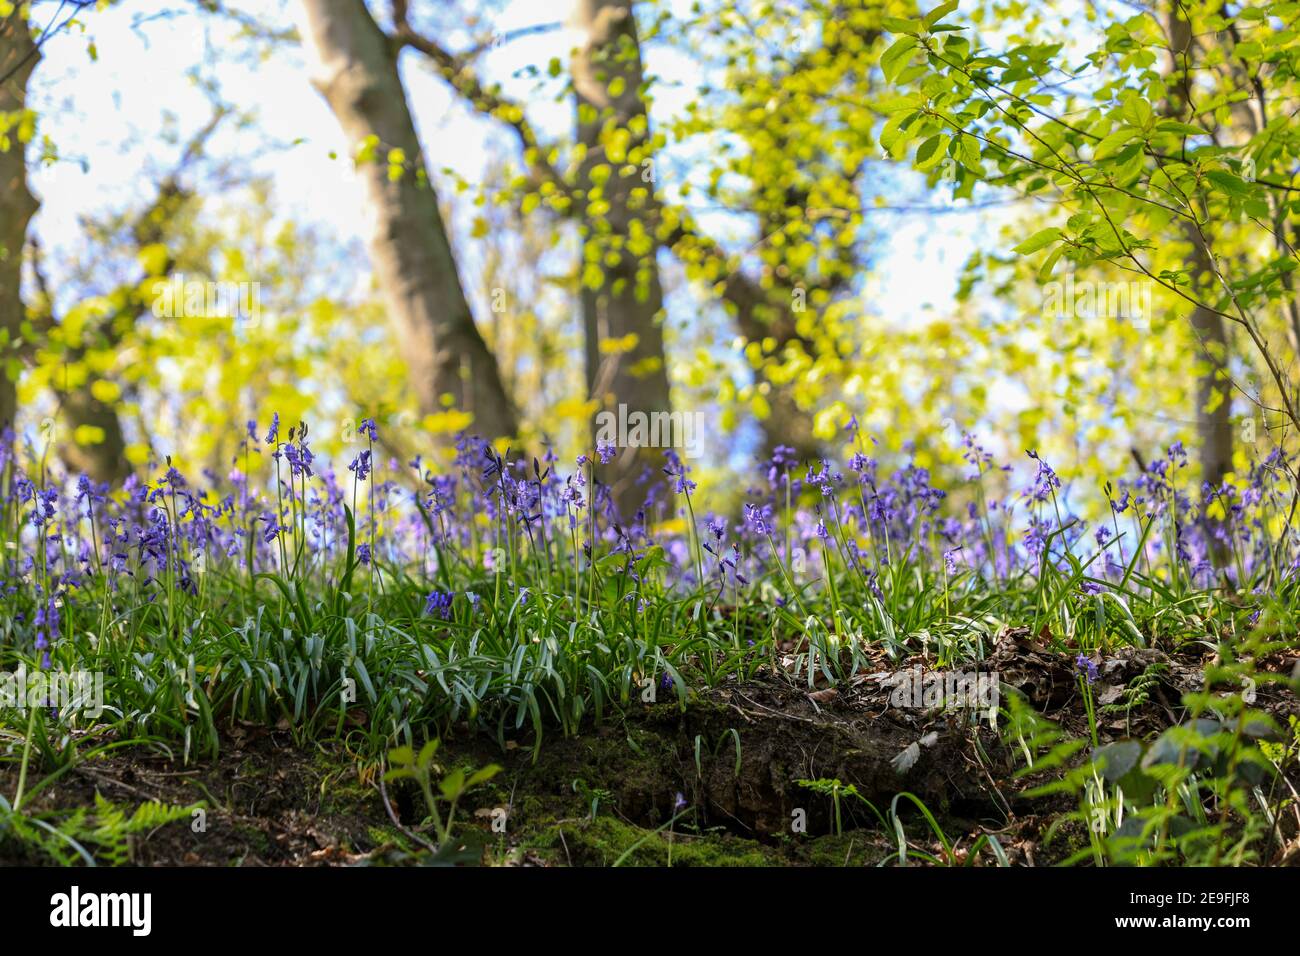 An English Bluebell wood in spring time with the leaves on the trees just coming out, England, UK Stock Photo